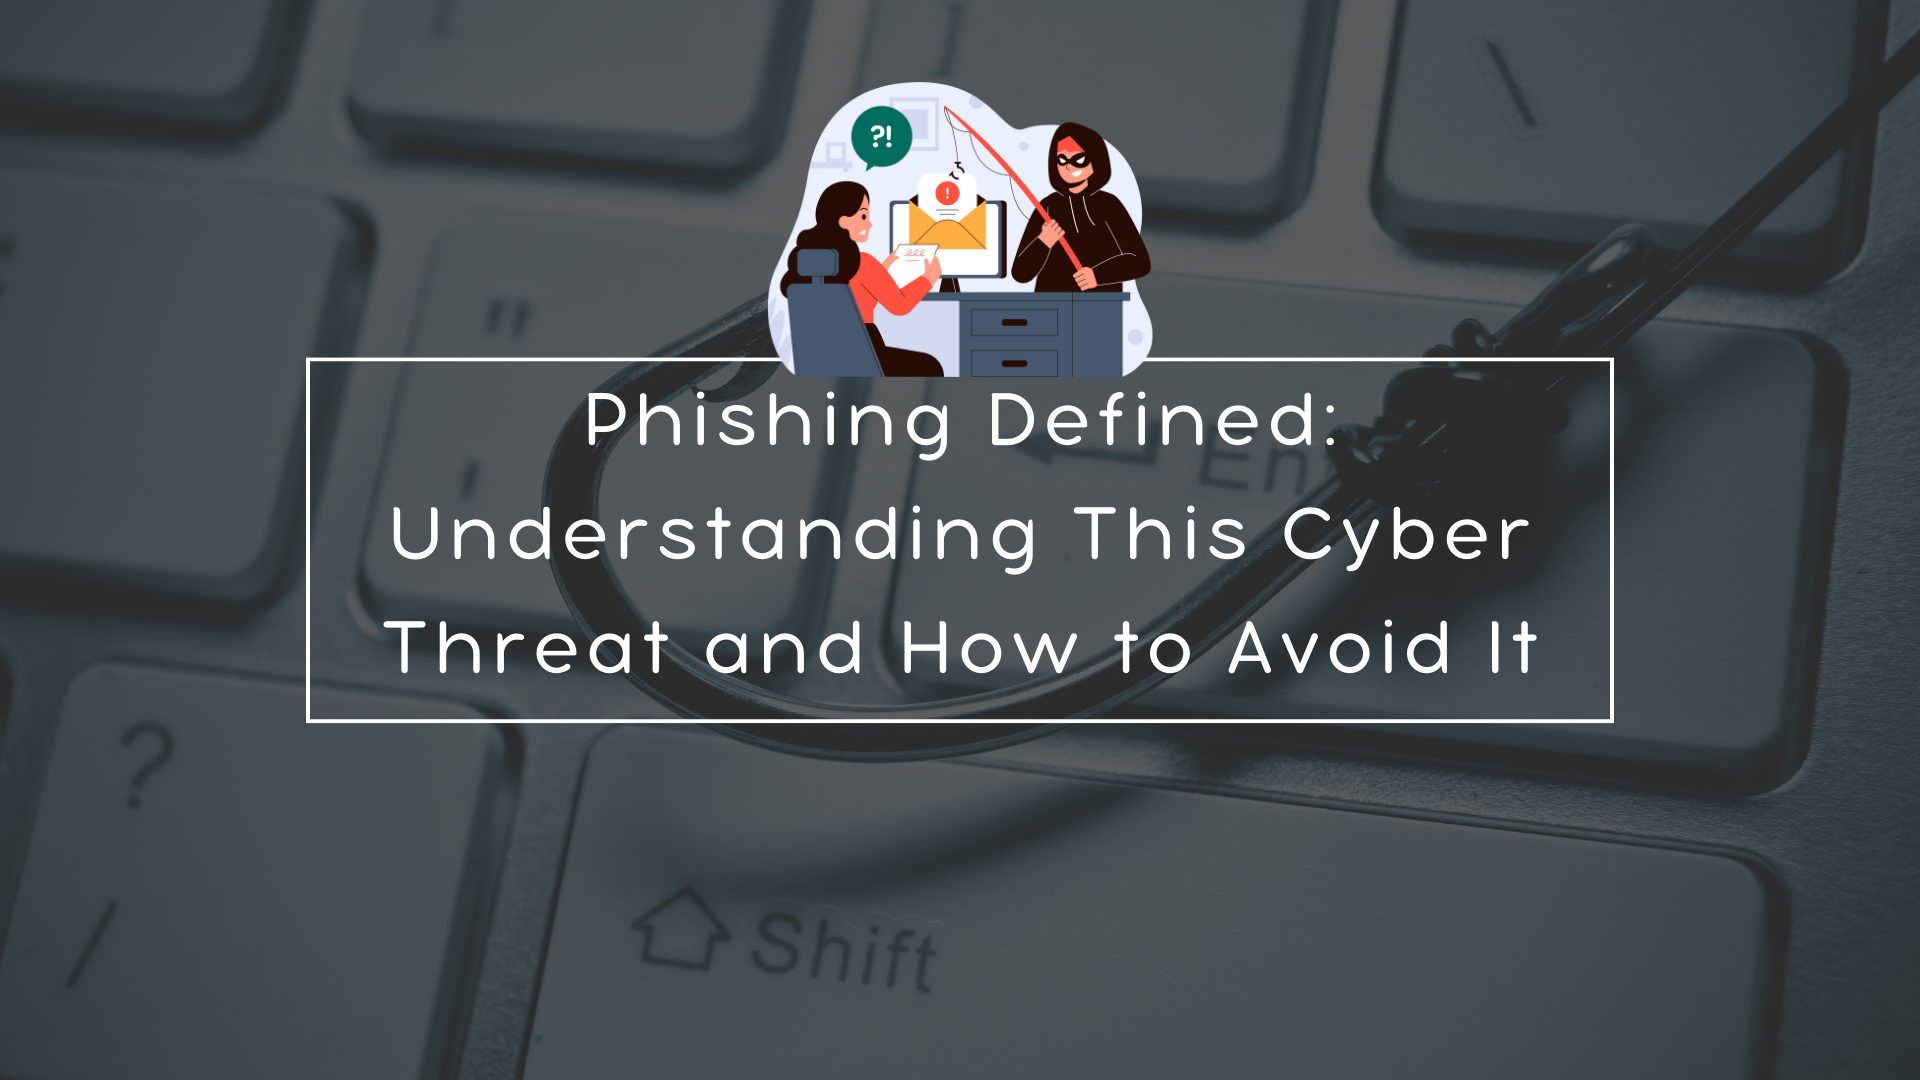 Phishing Defined: Understanding This Cyber Threat and How to Avoid It